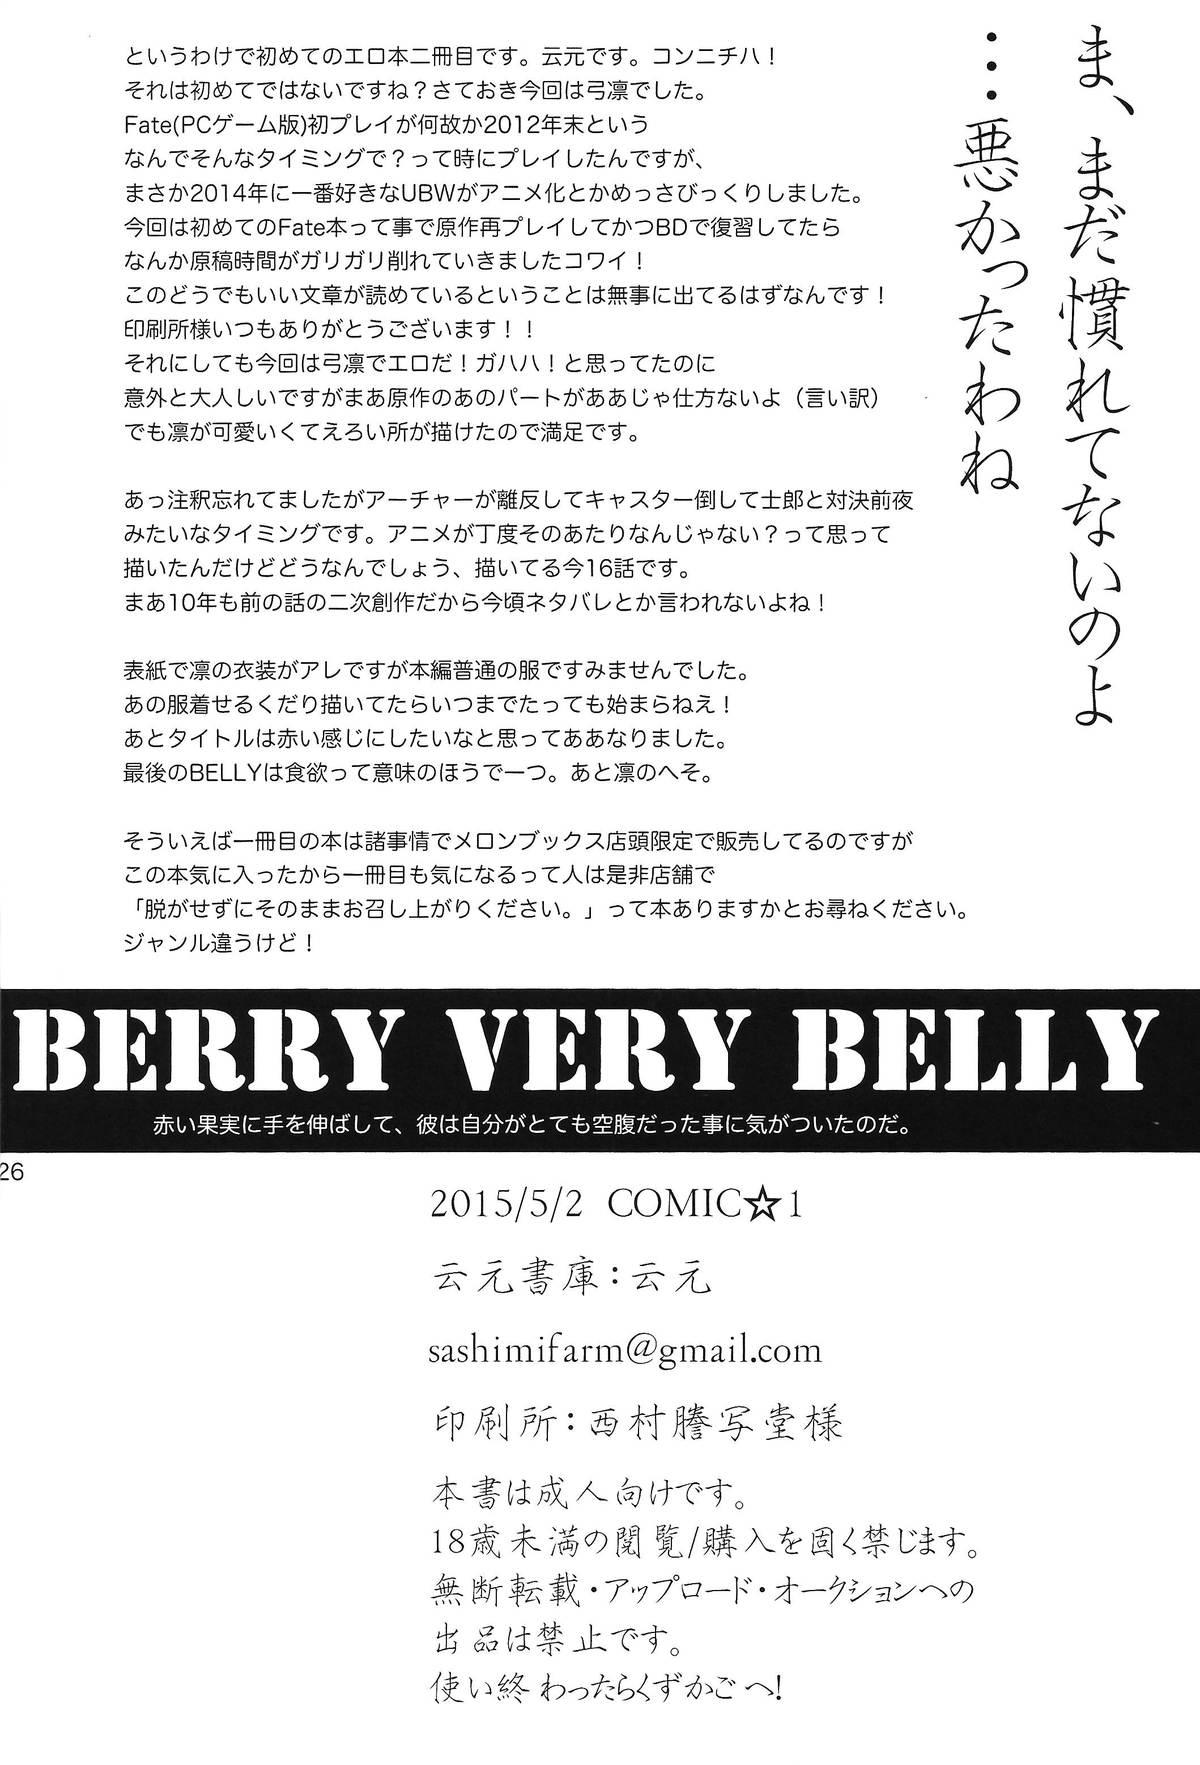 Duro BERRY VERY BELLY - Fate stay night Hardcore Porn Free - Page 24